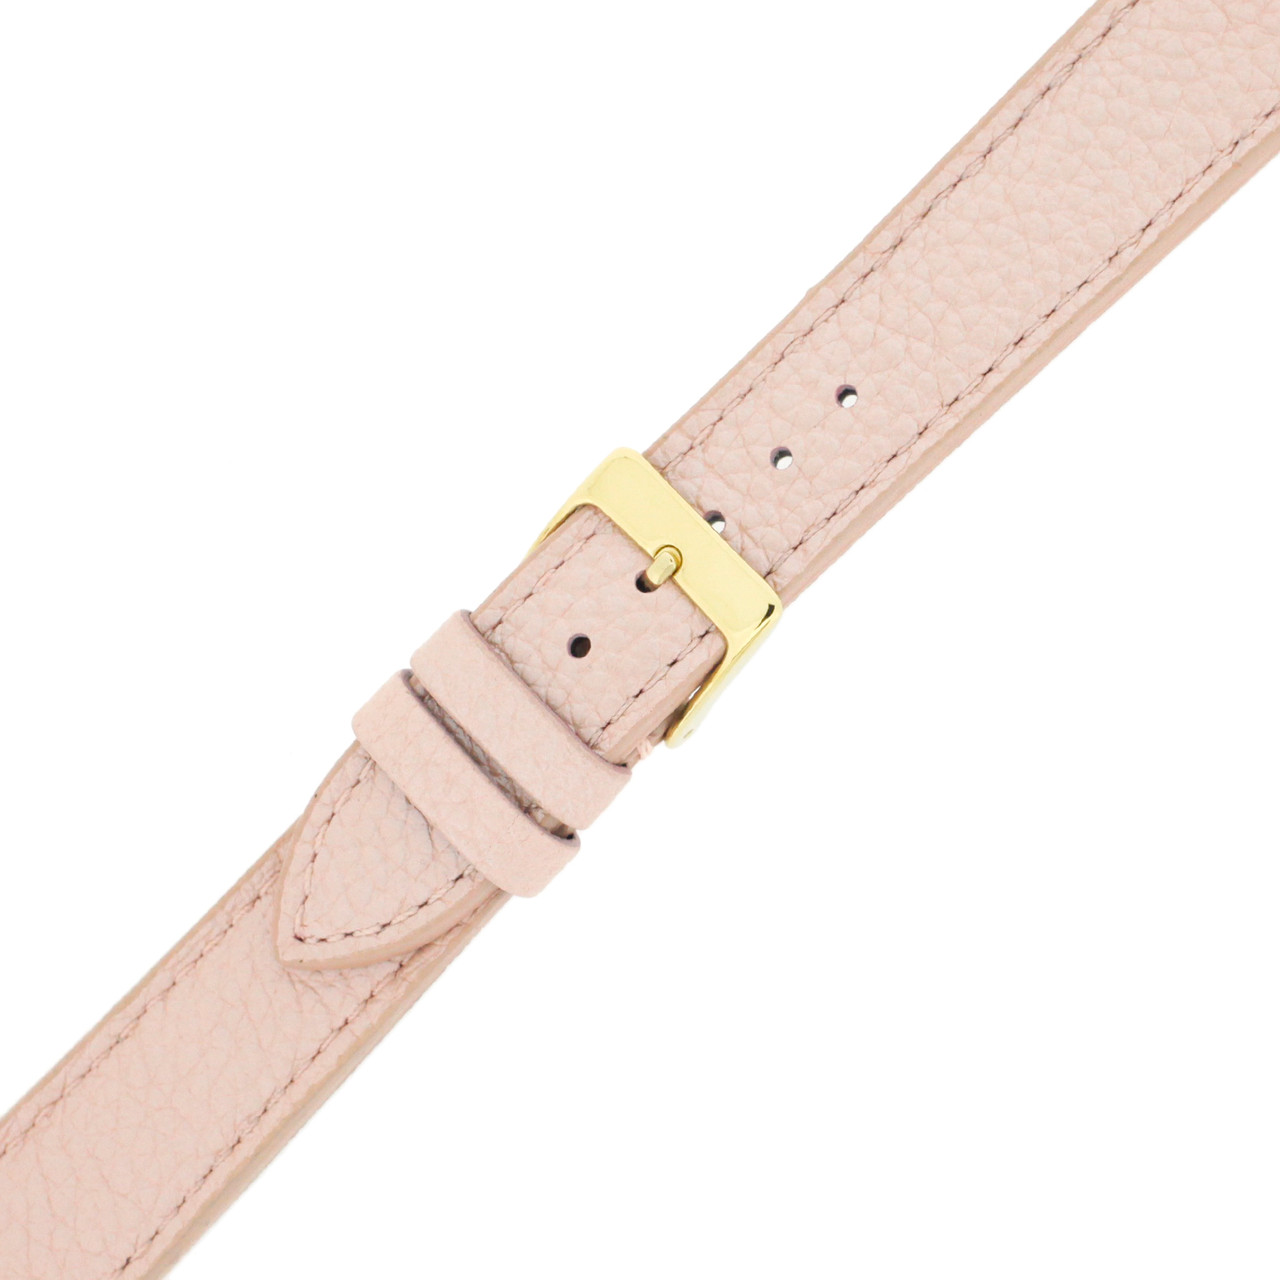 Watch Band Pink Metallic Leather Watch Band Quick Release Springs 12mm-20mm